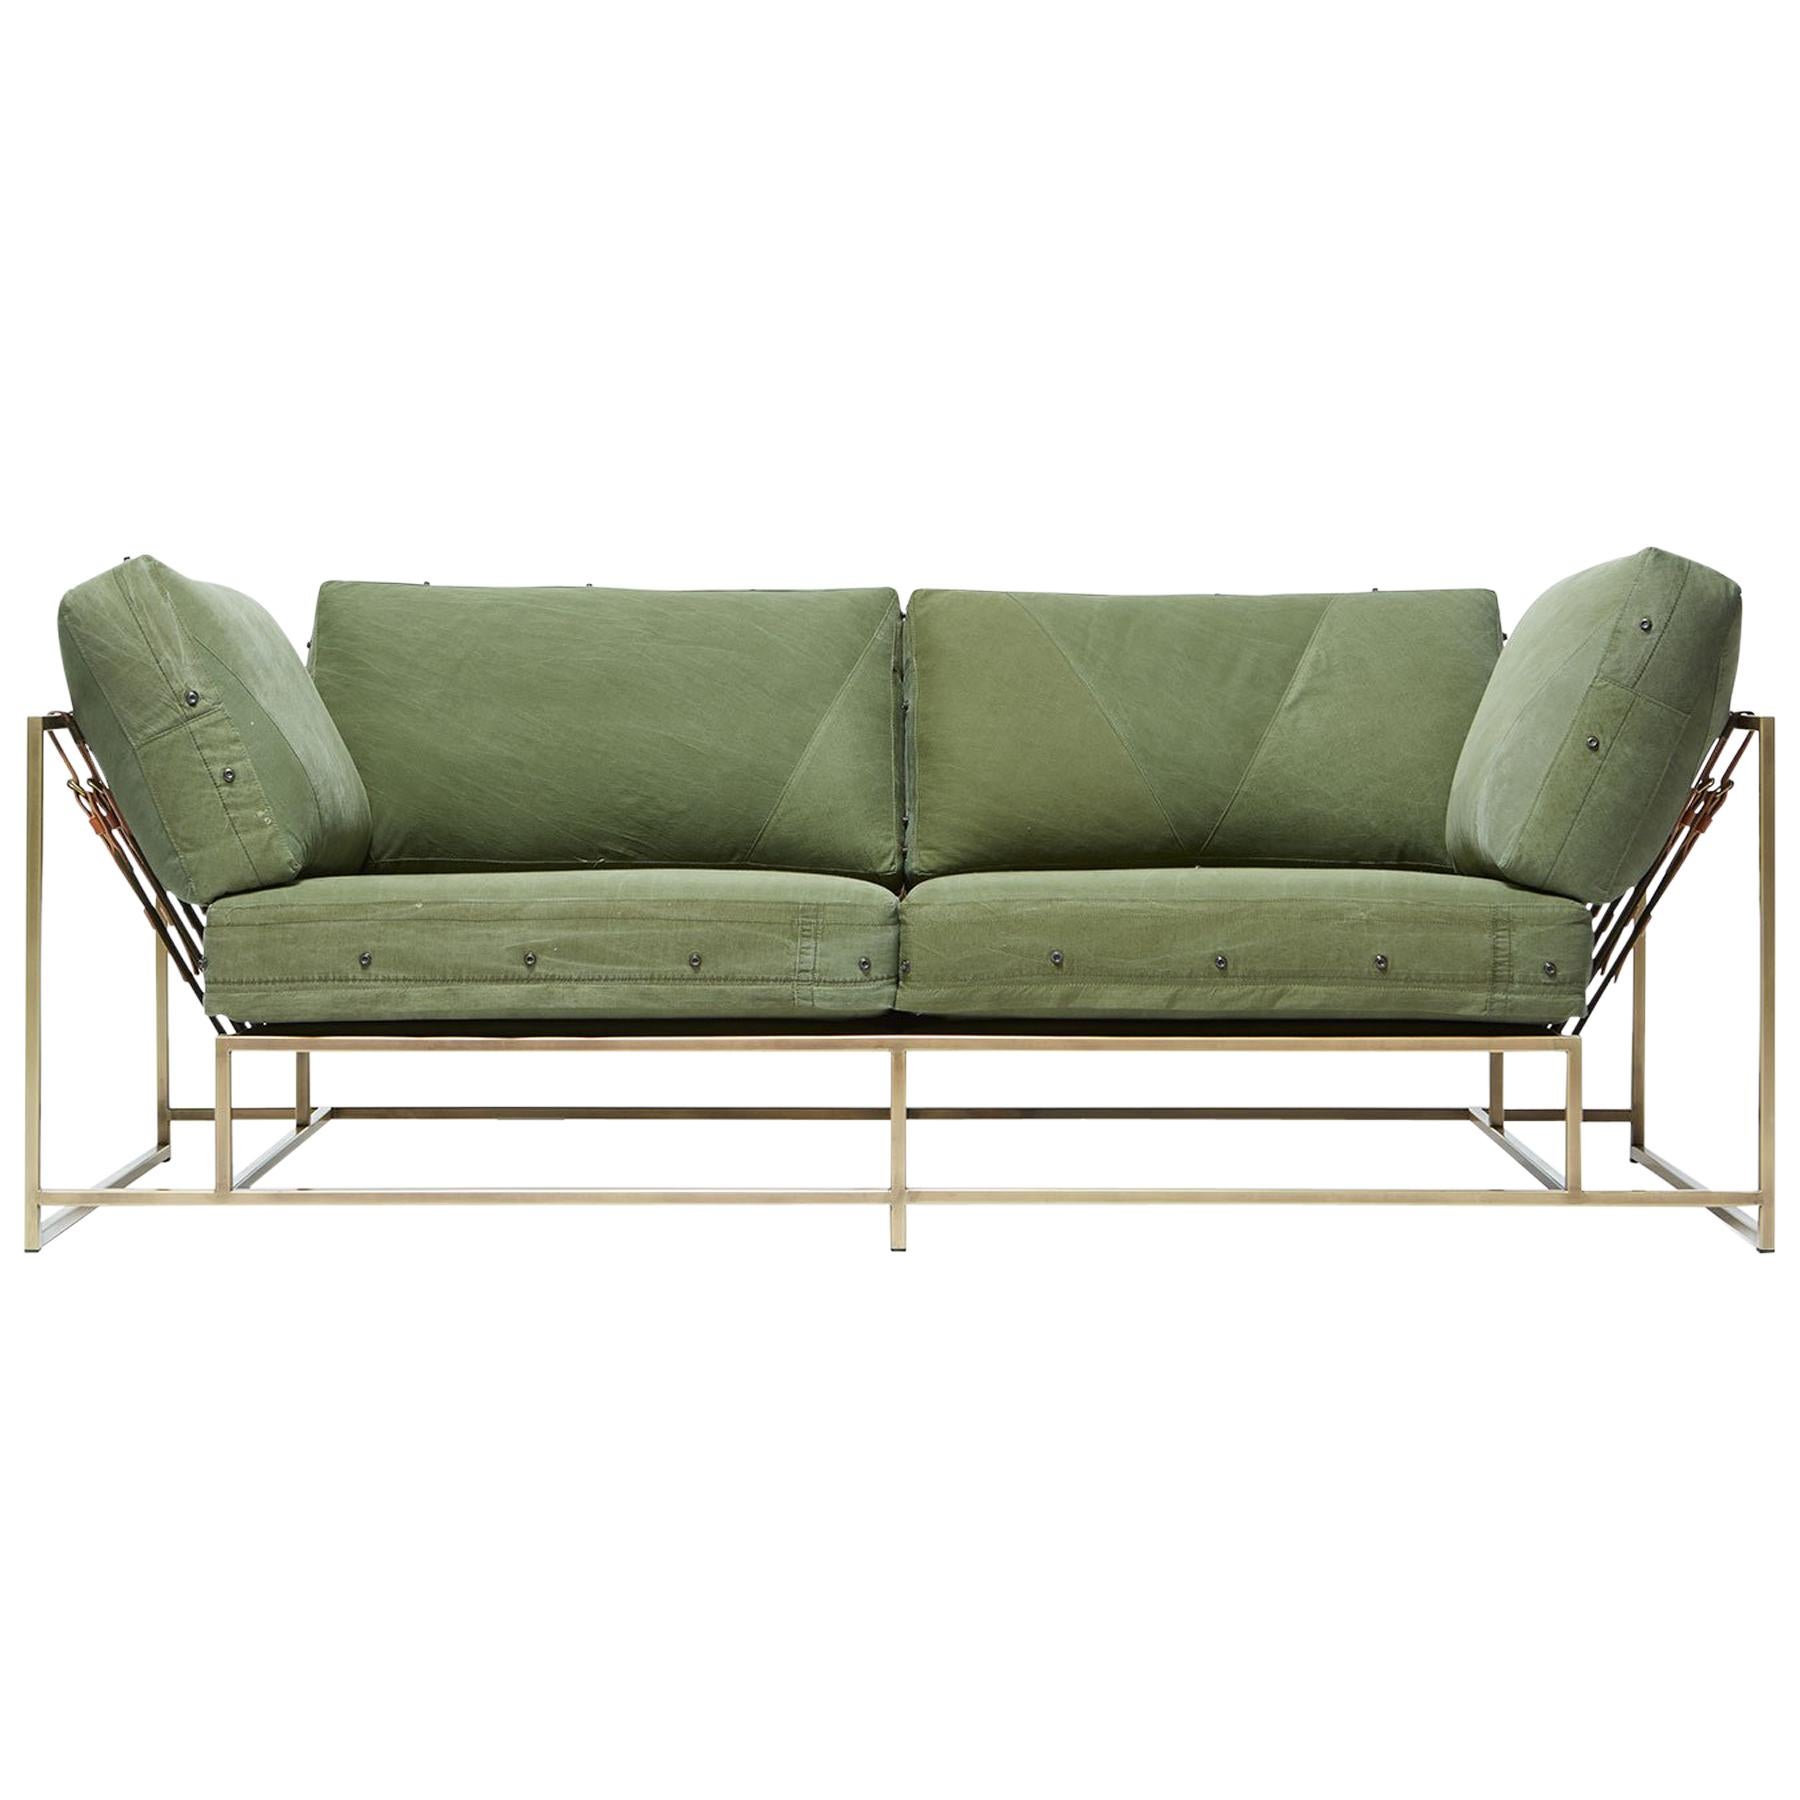 Vintage Military Canvas and Antique Brass Two-Seat Sofa